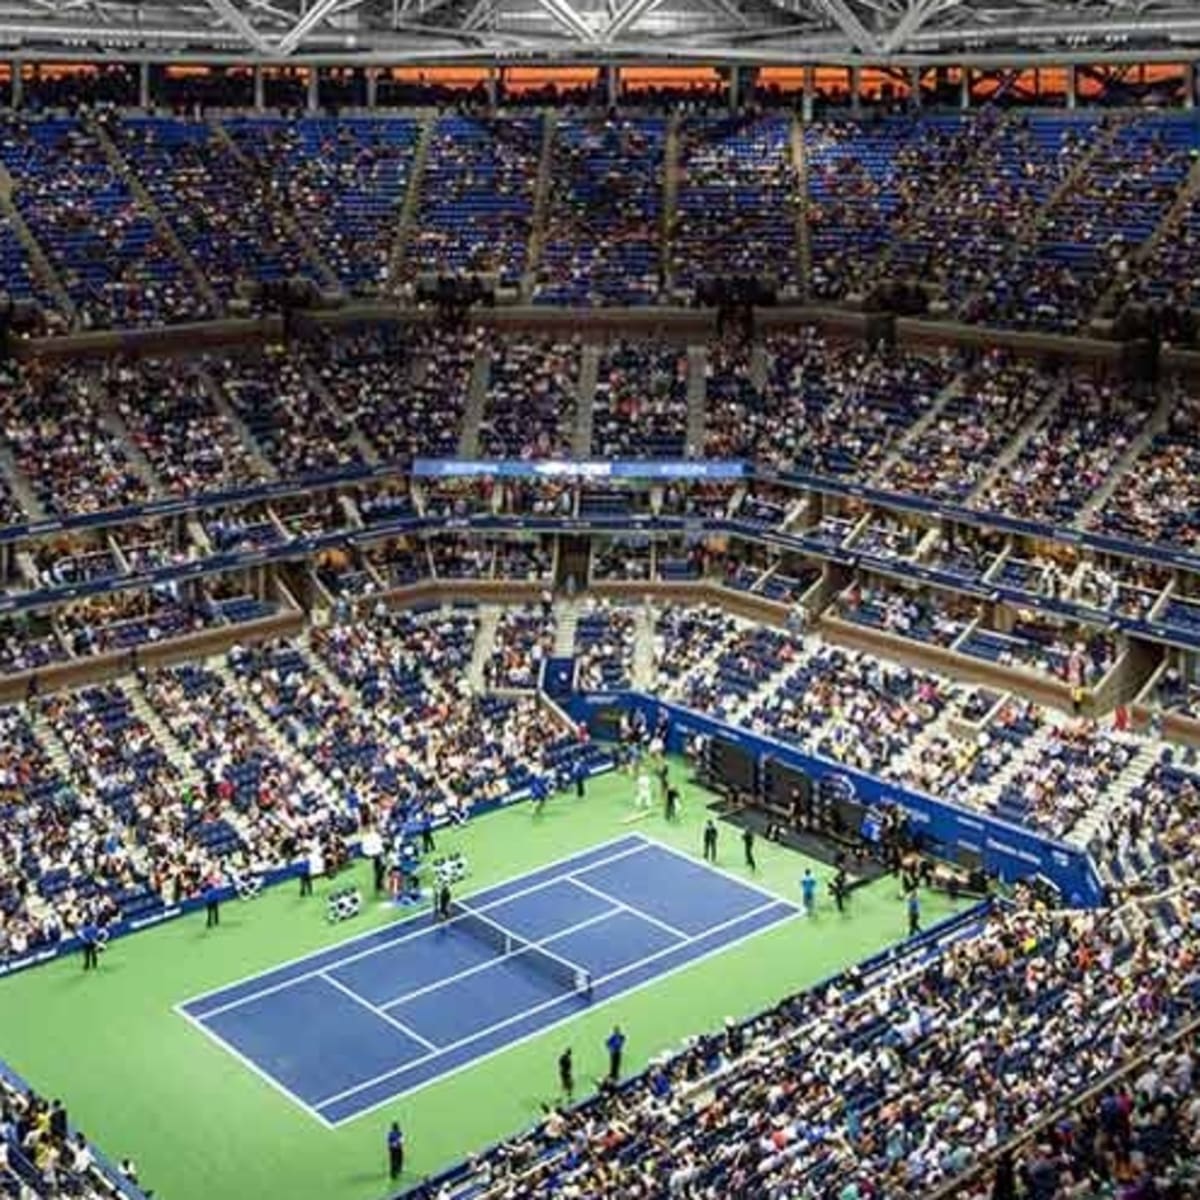 Watch Qualifying Matches Stream US Open Tennis live, TV - How to Watch and Stream Major League and College Sports